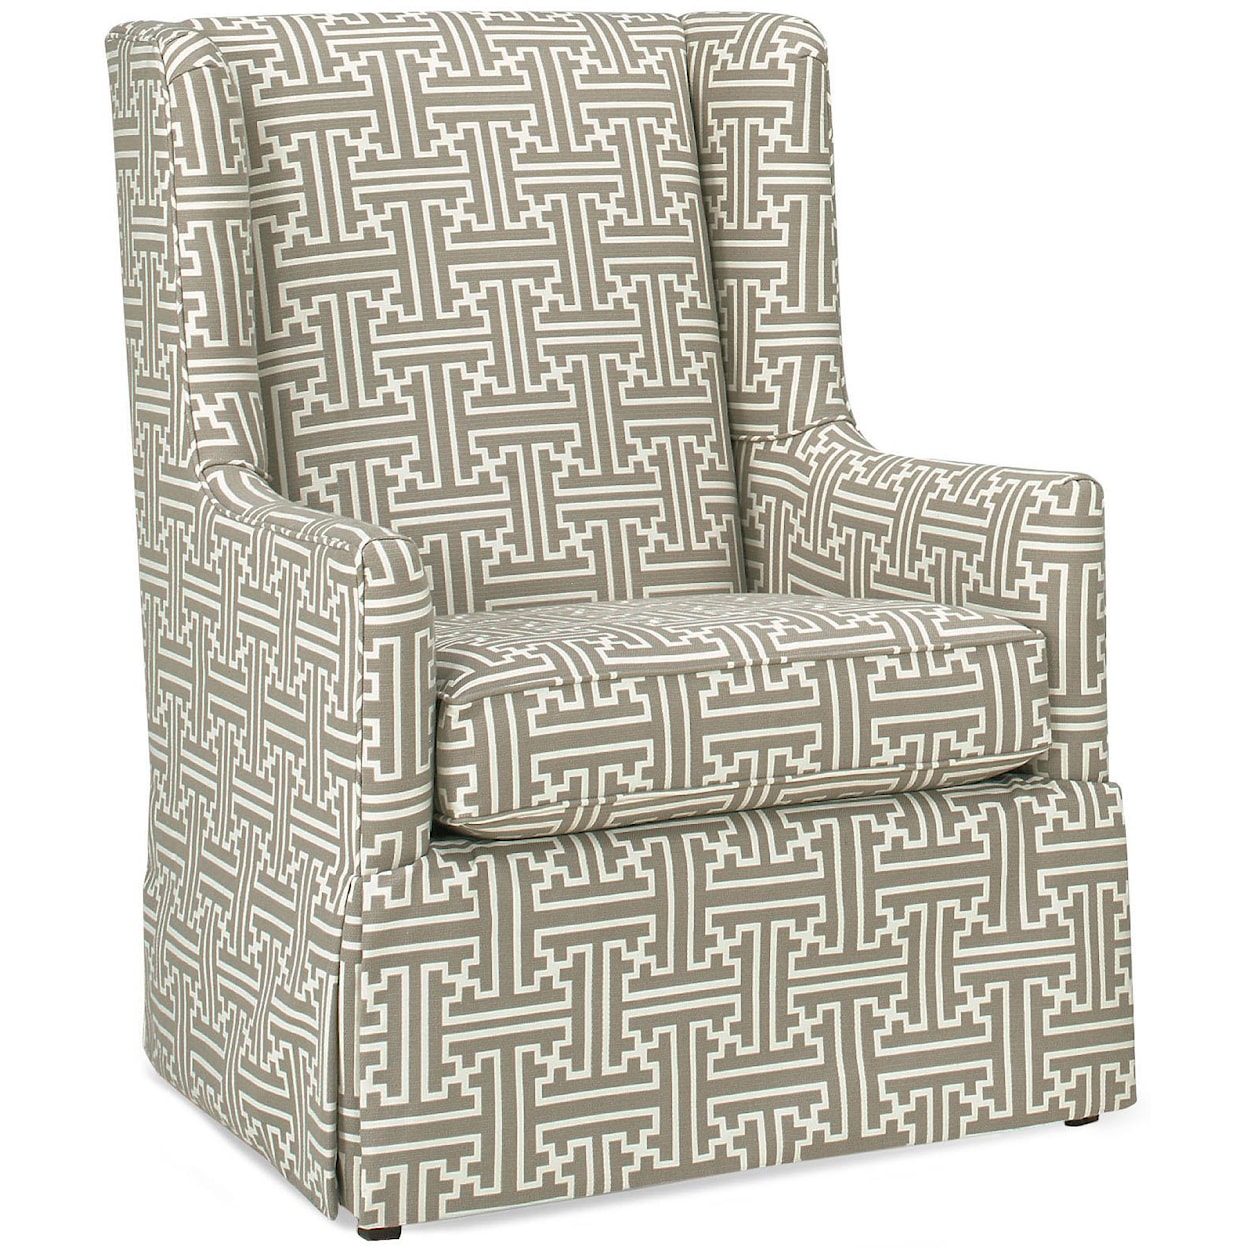 Temple Furniture Accent Chairs Transitional Wing Back Chair